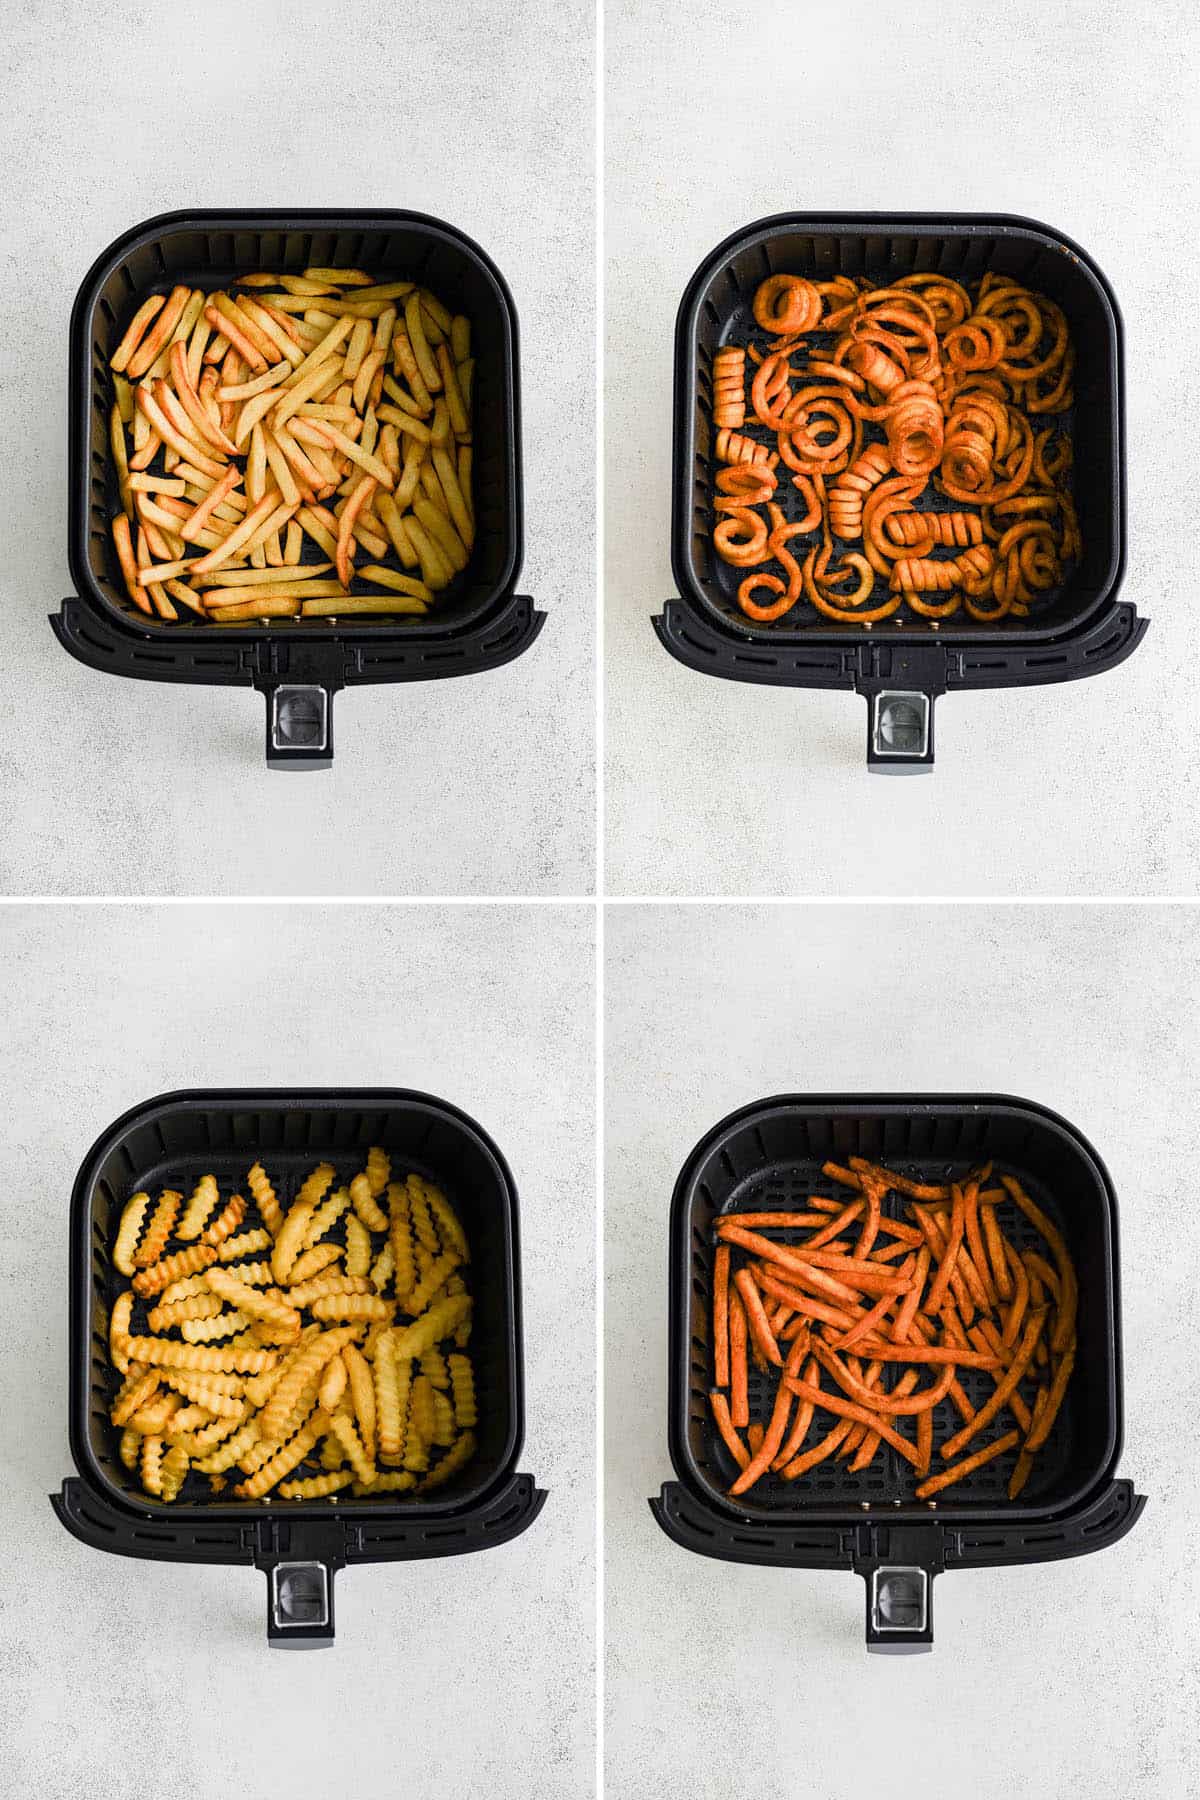 four panel collage image showing air fryer baskets filled with different styles of frozen french fries